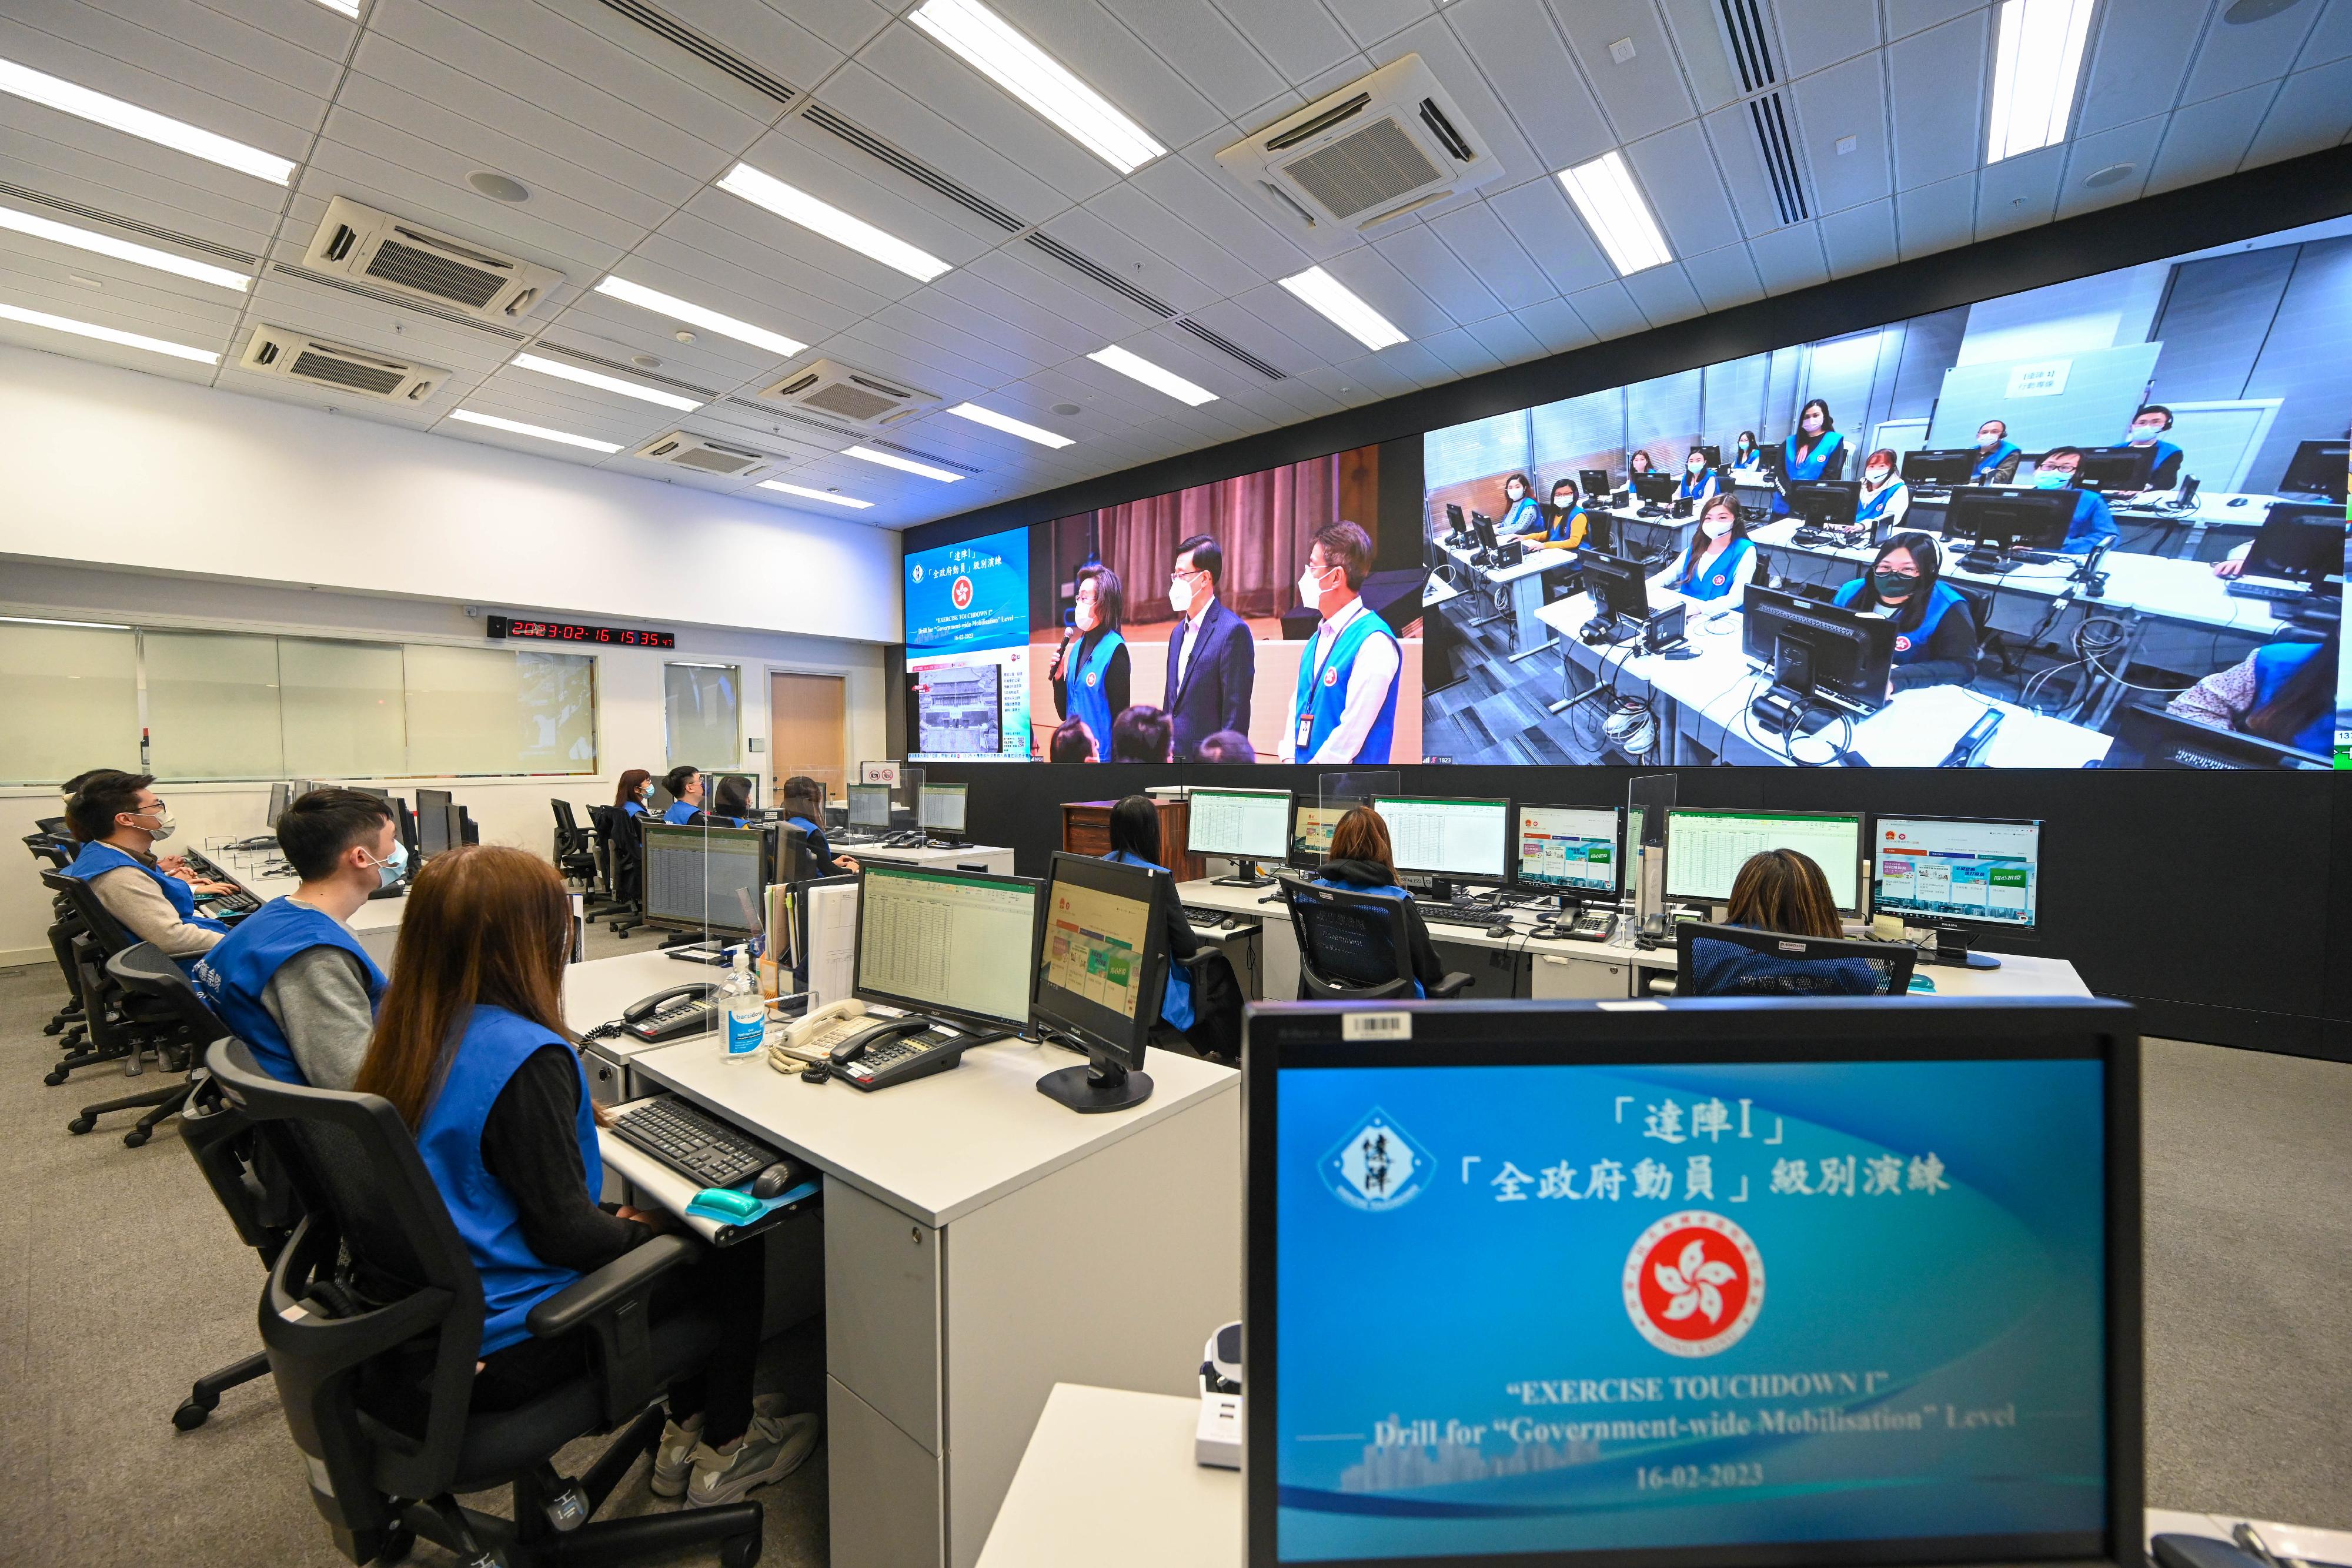 Around 10 000 staff members from 77 bureaux/departments participated in the first drill under the "government-wide mobilisation" level after its introduction at various locations today (February 16). After starting the drill, the Emergency Monitoring and Support Centre located in the Central Government Offices was also activated to monitor the situation.